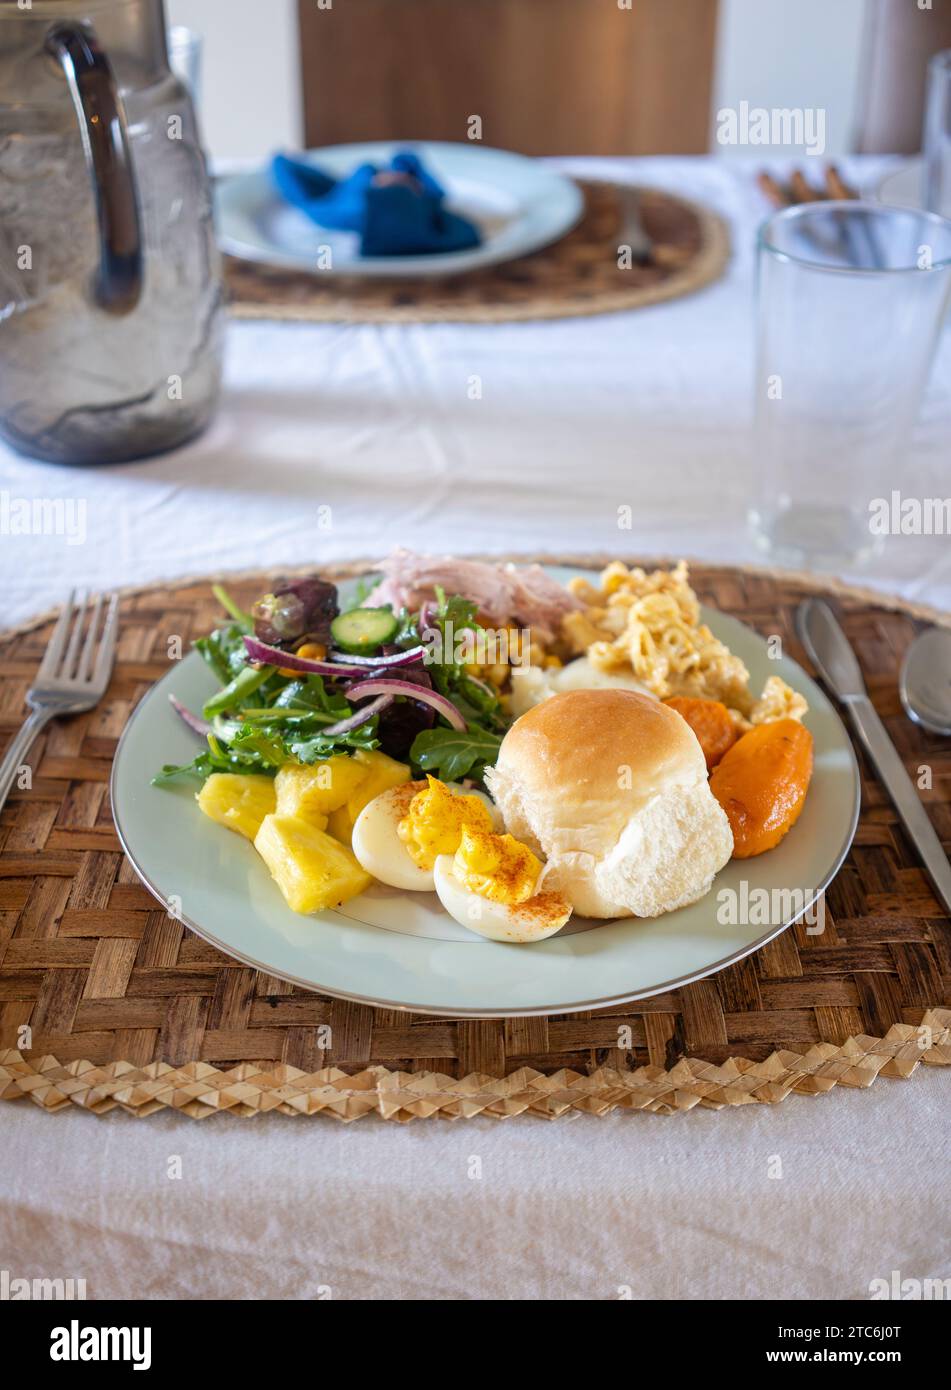 Colorful plate of food featuring traditional Thanksgiving foods Stock Photo